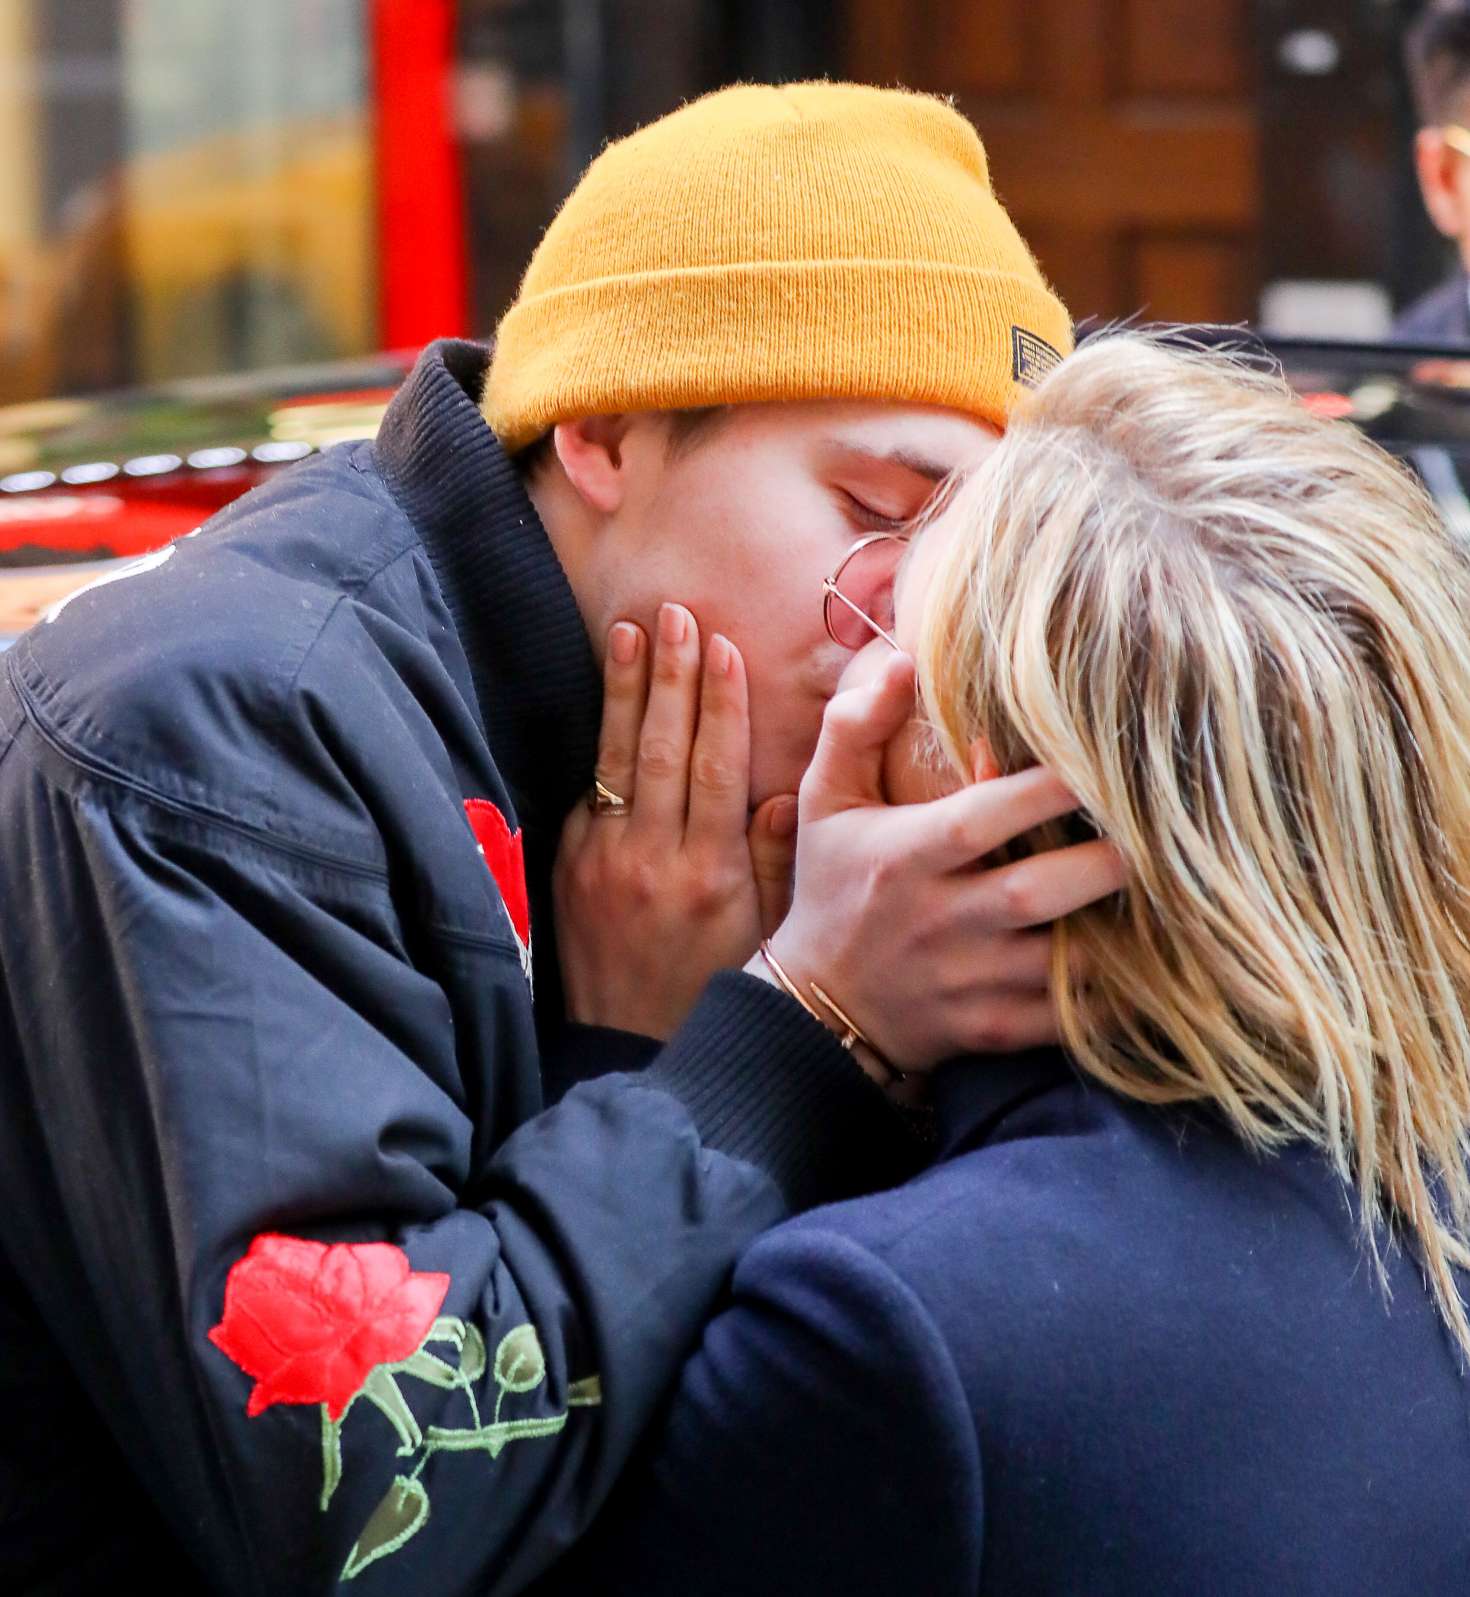 Chloe Moretz and Brooklyn Beckham out in NYC